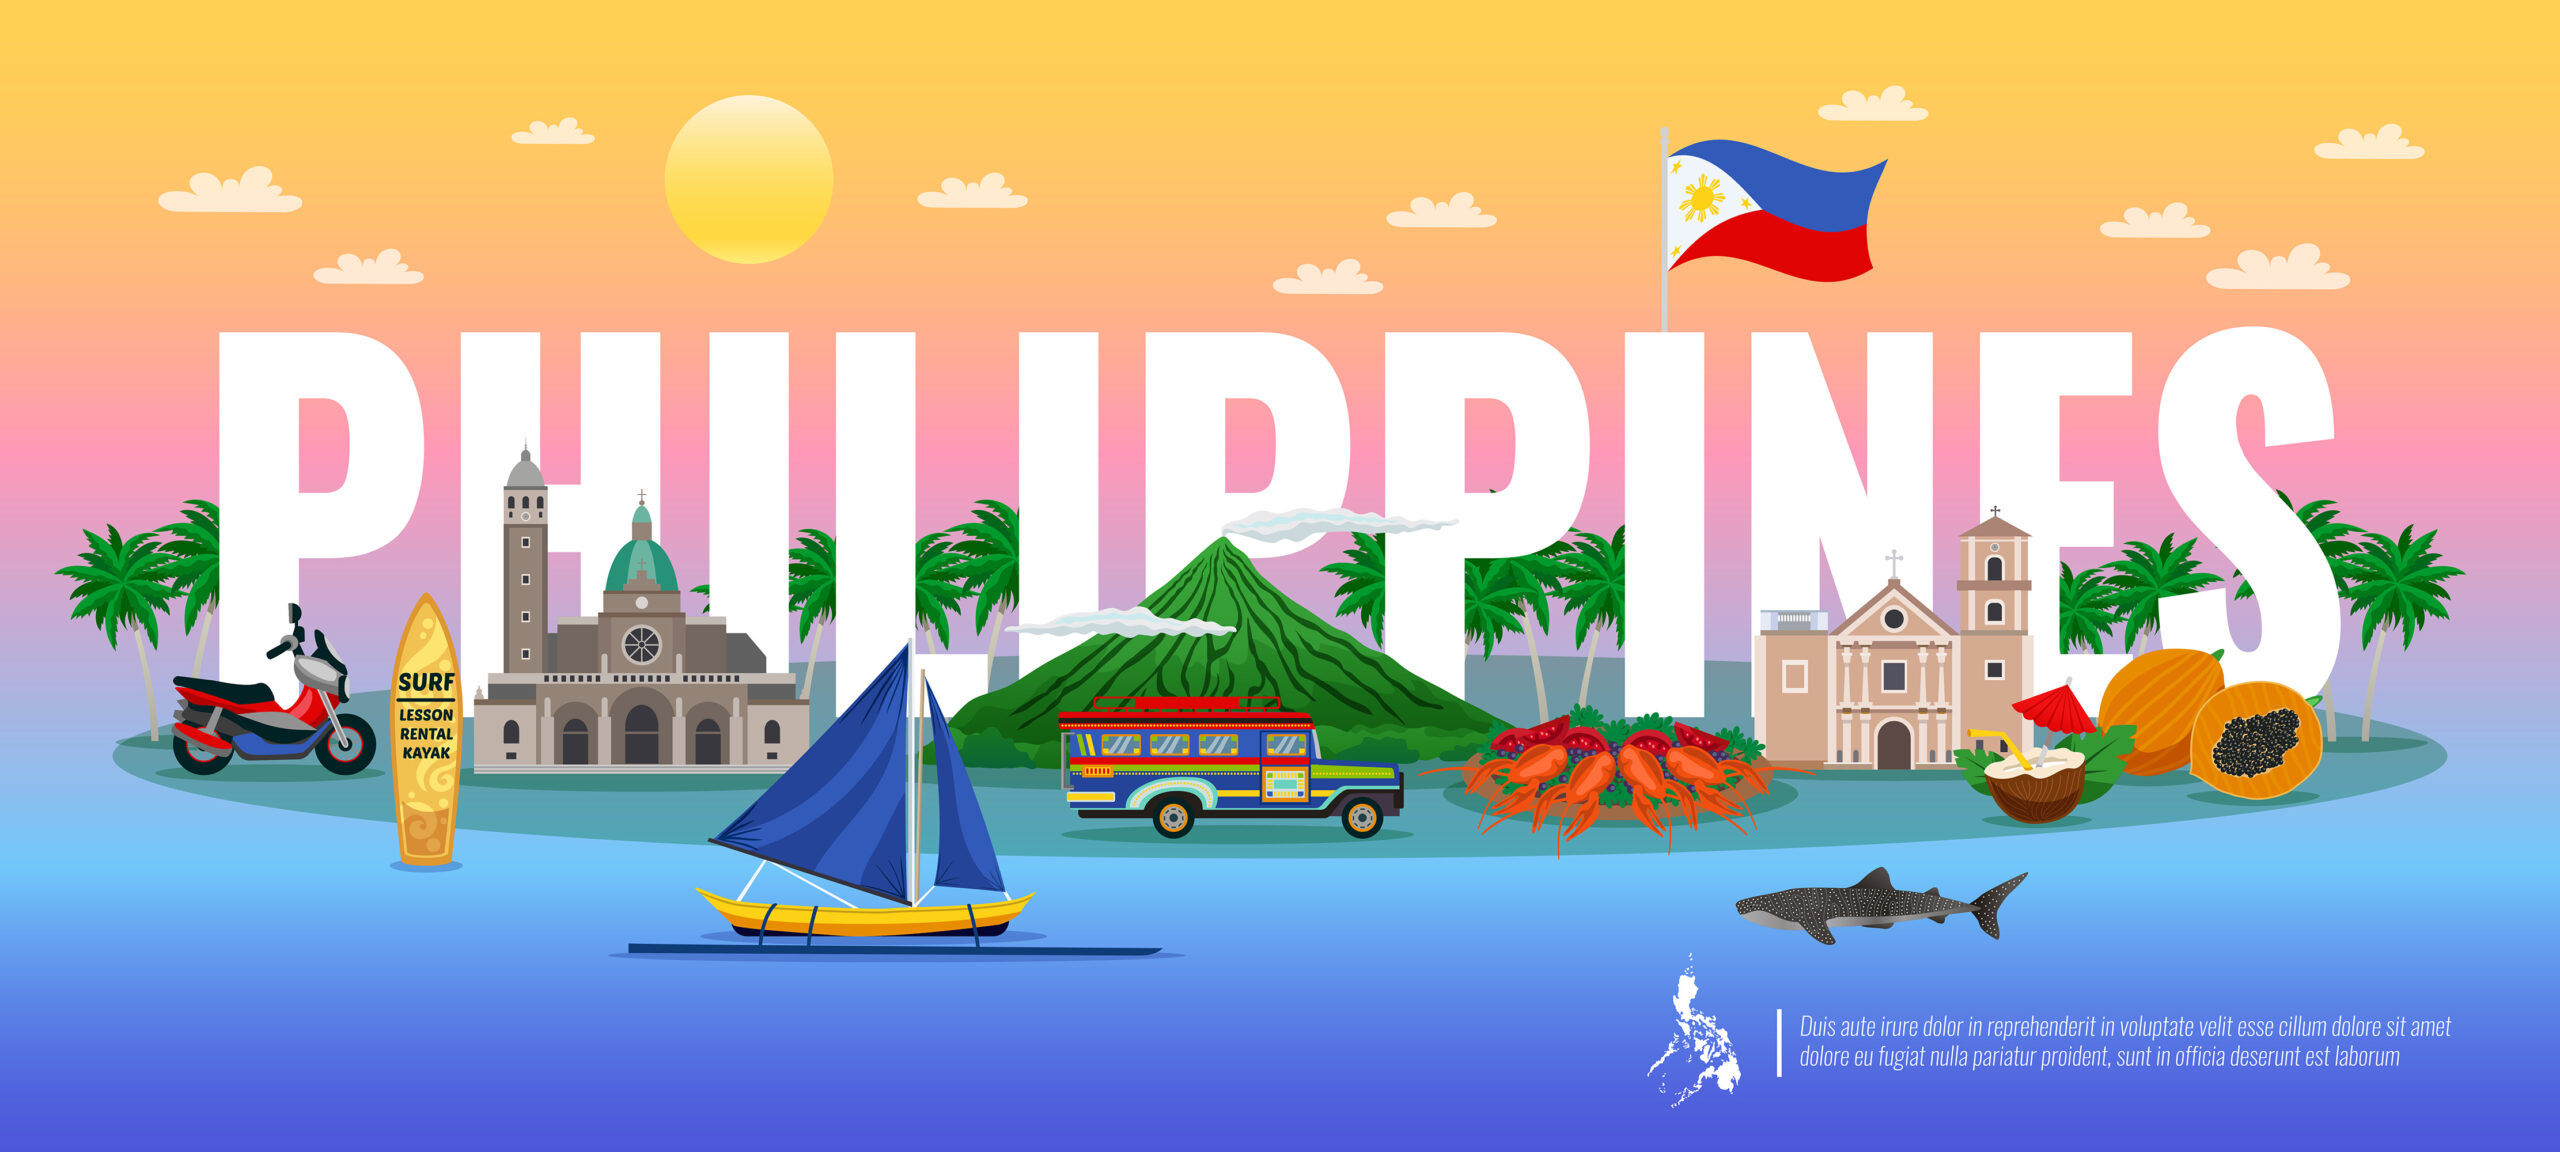 Philippines Wallpaper - Let's Find the Tallest Buildings in the Philippines